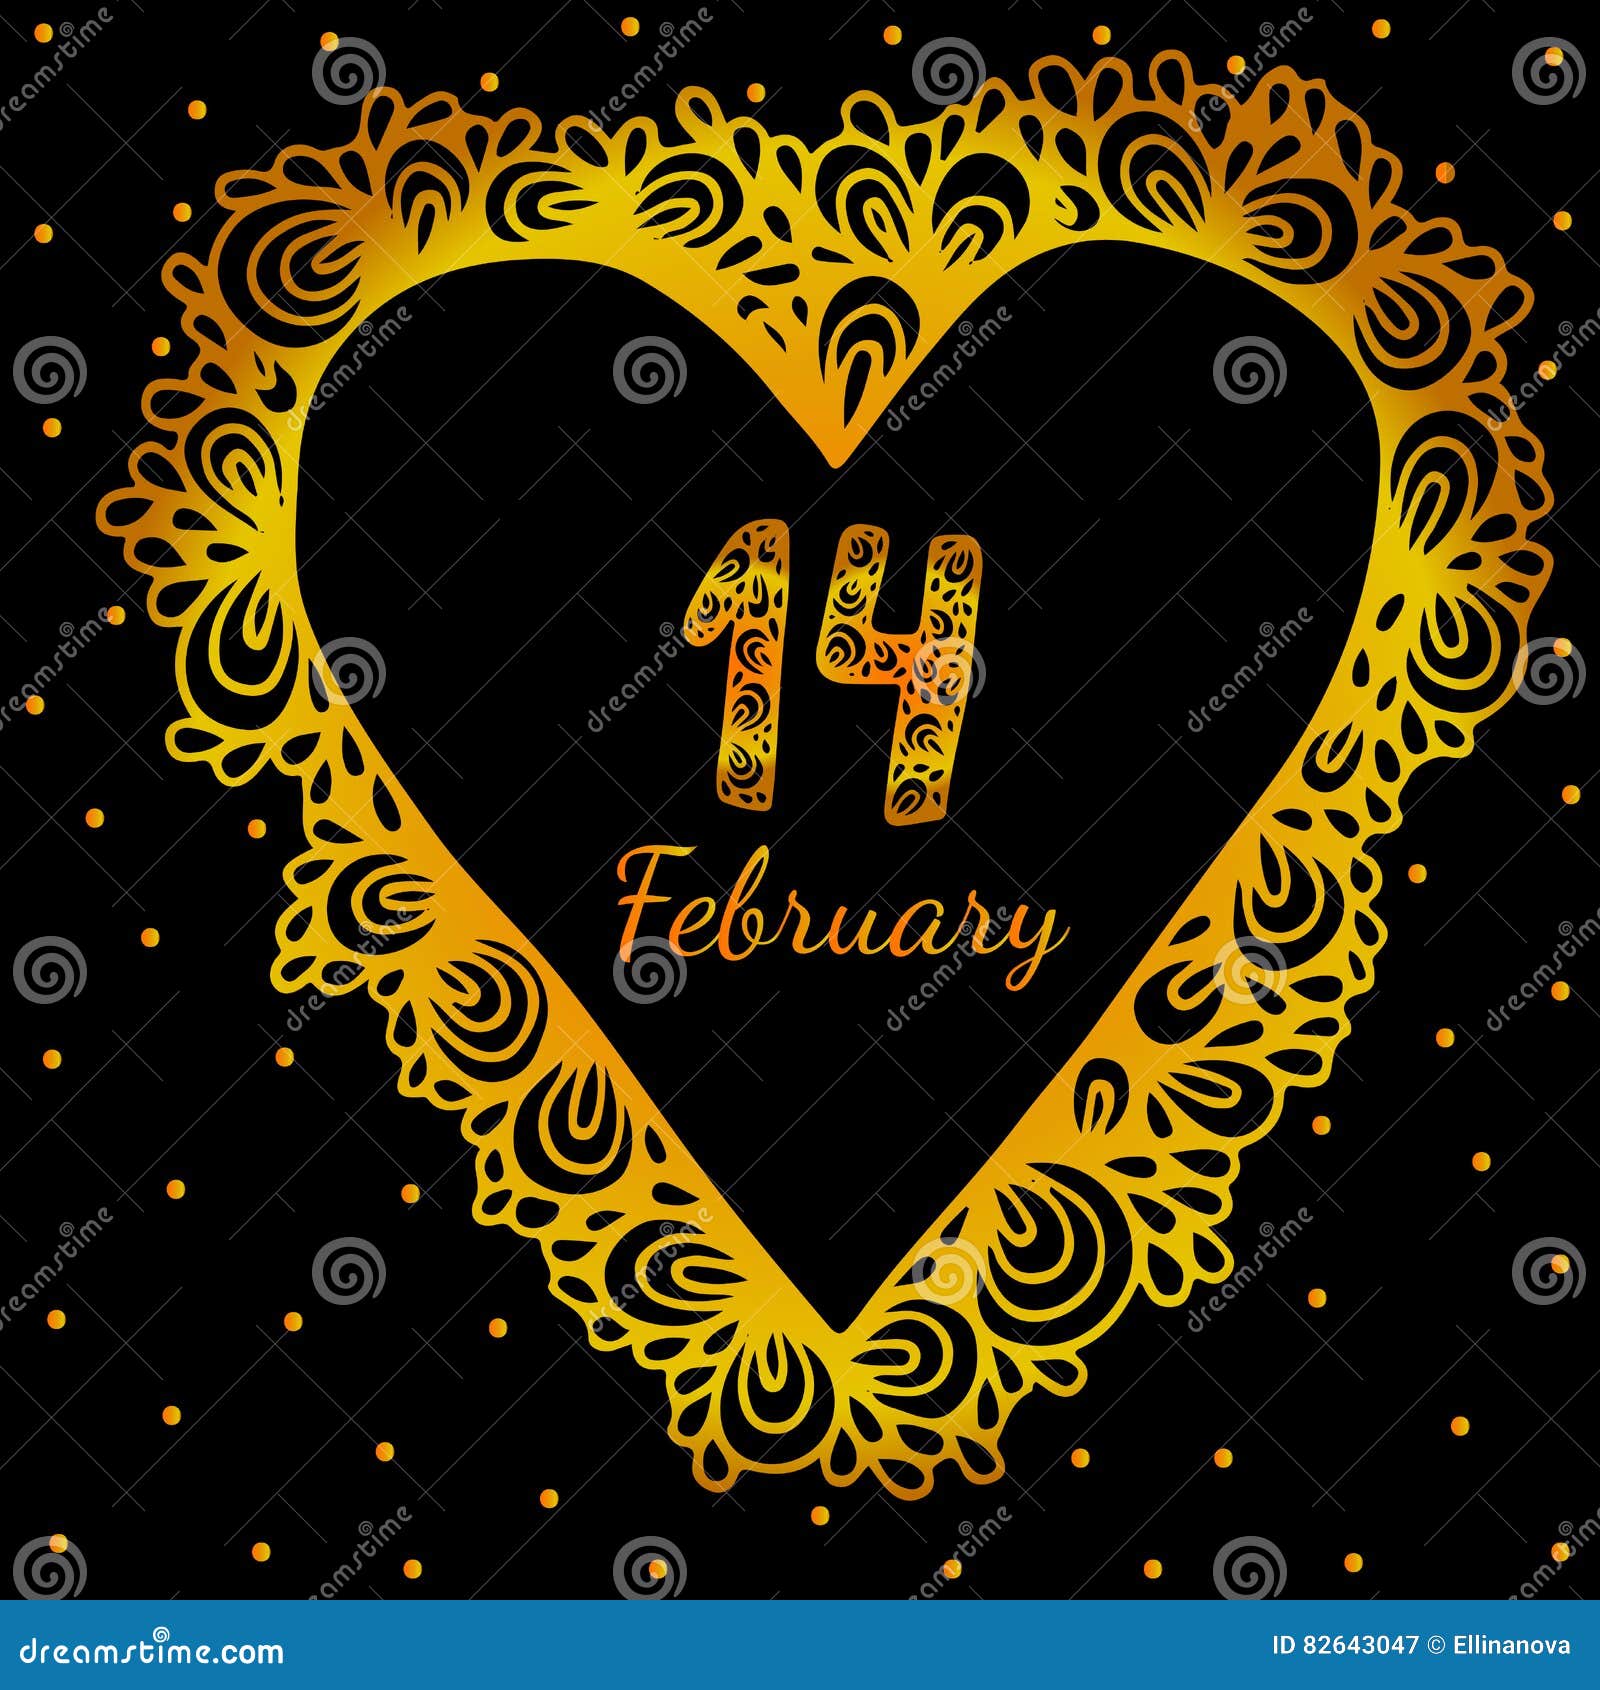 Gold Heart Frame Shaped with Fourteenth February Text Stock Vector ...